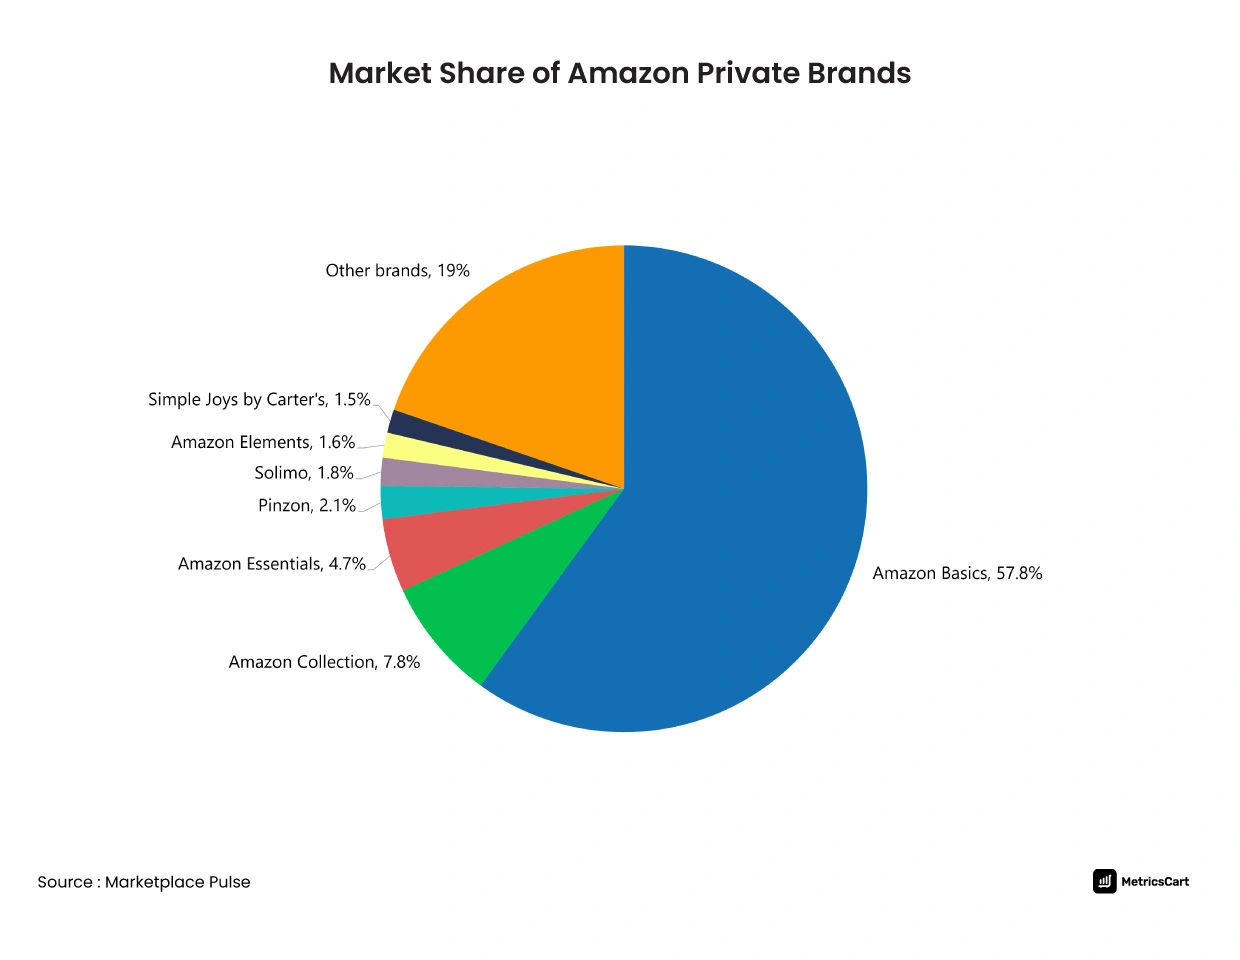 pie chart showing market share of amazon private brands